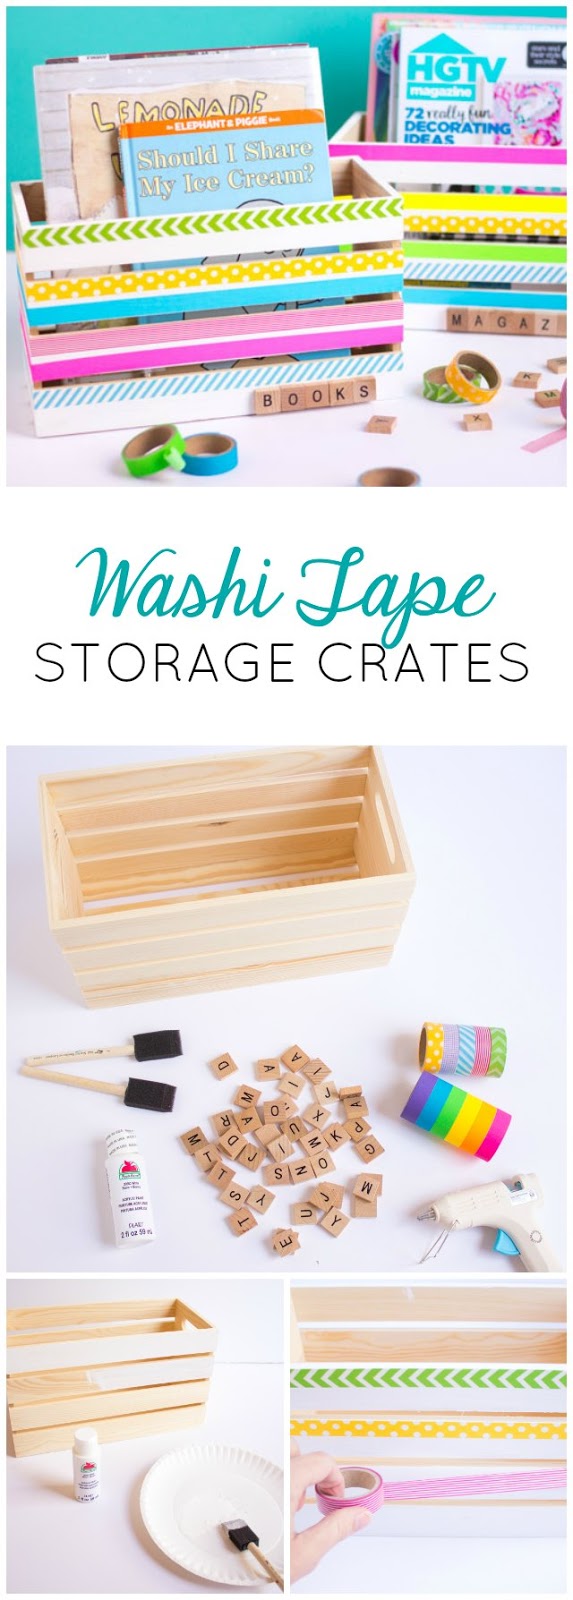 Such a fun washi tape craft idea - DIY wood storage crates perfect for books, craft supplies, and toys!